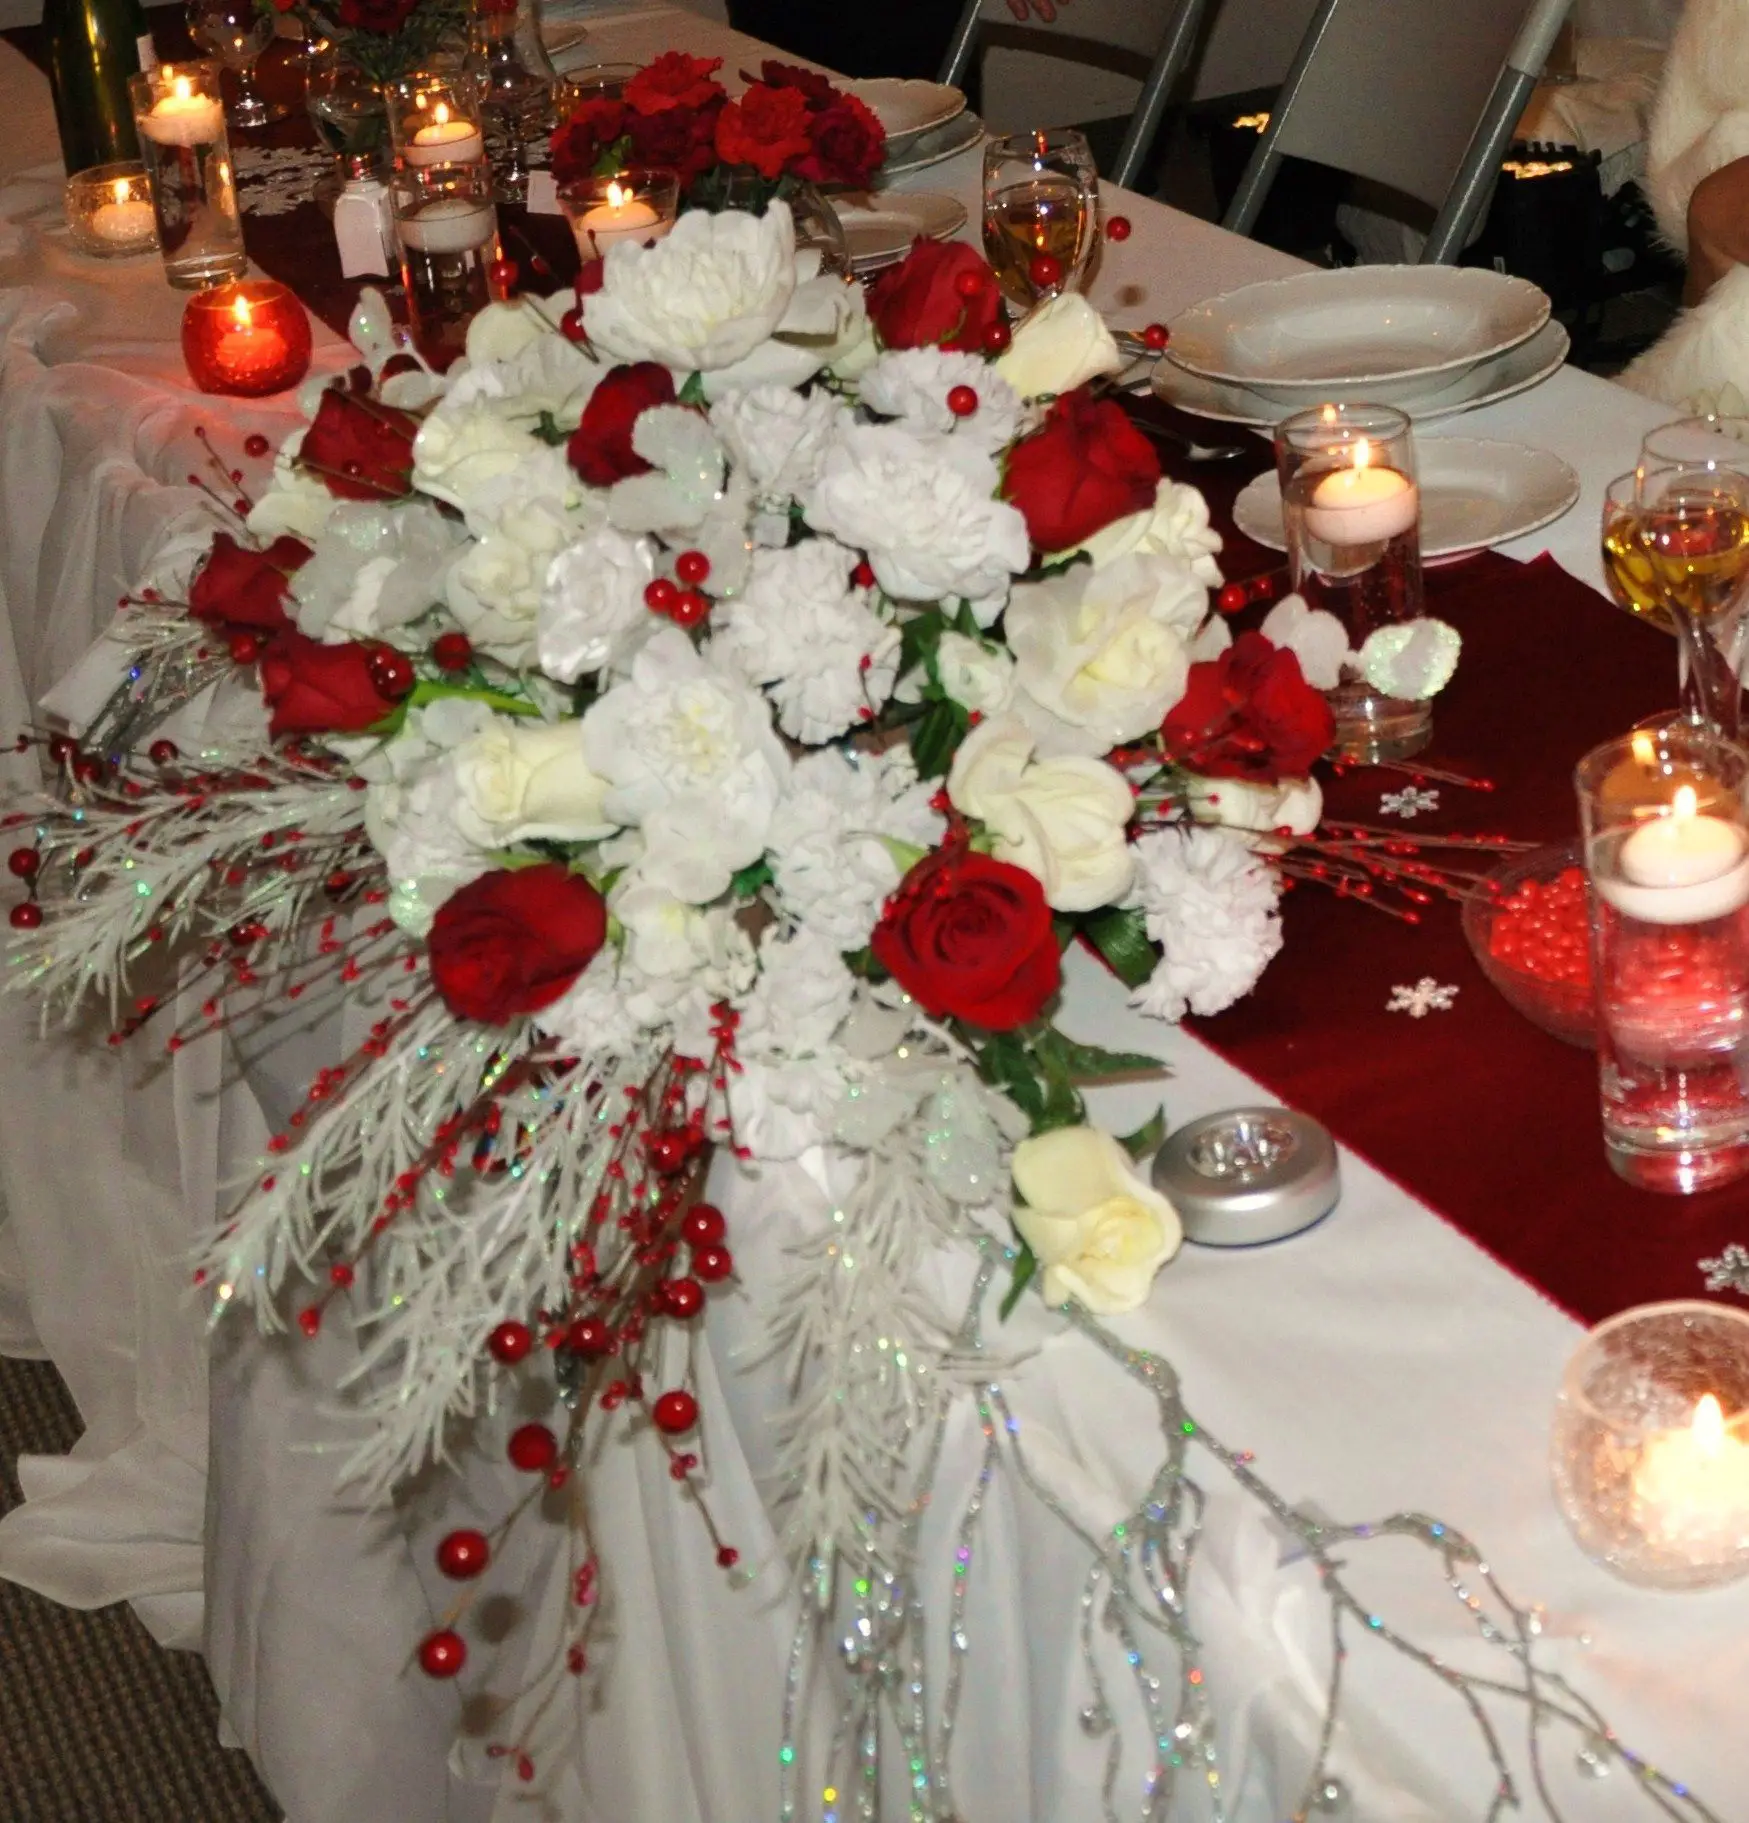 Red and white winter themed wedding, berries, frosted branches, flowers ...